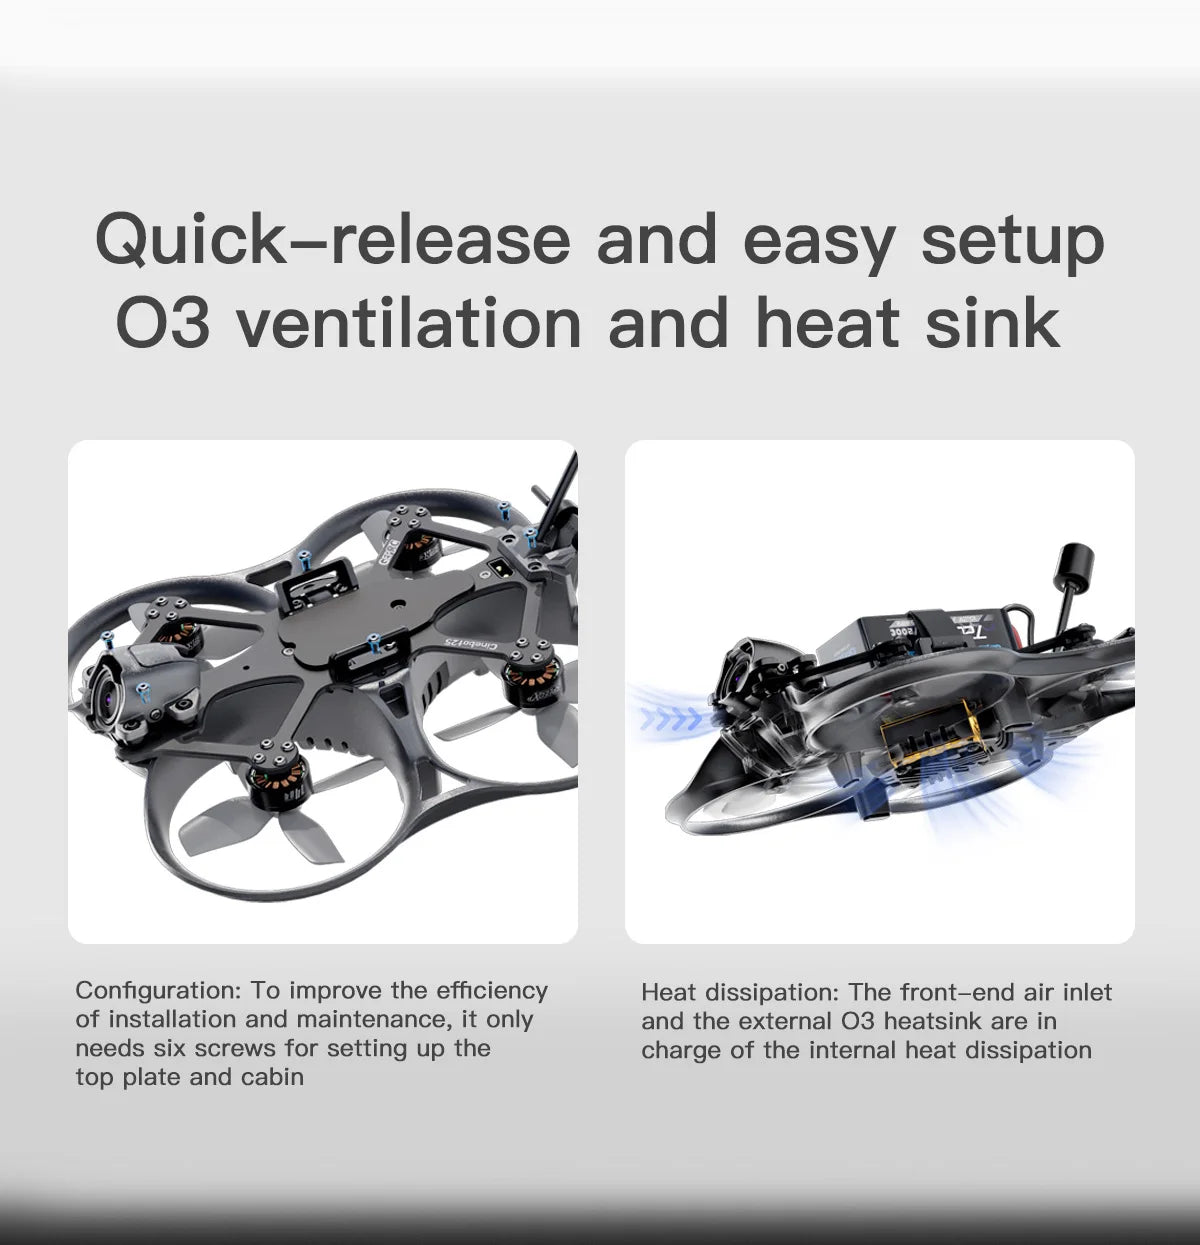 GEPRC Cinebot25 HD O3 FPV Drone, quick-release and easy setup 03 ventilation and heatsink are in needs six screws for setting